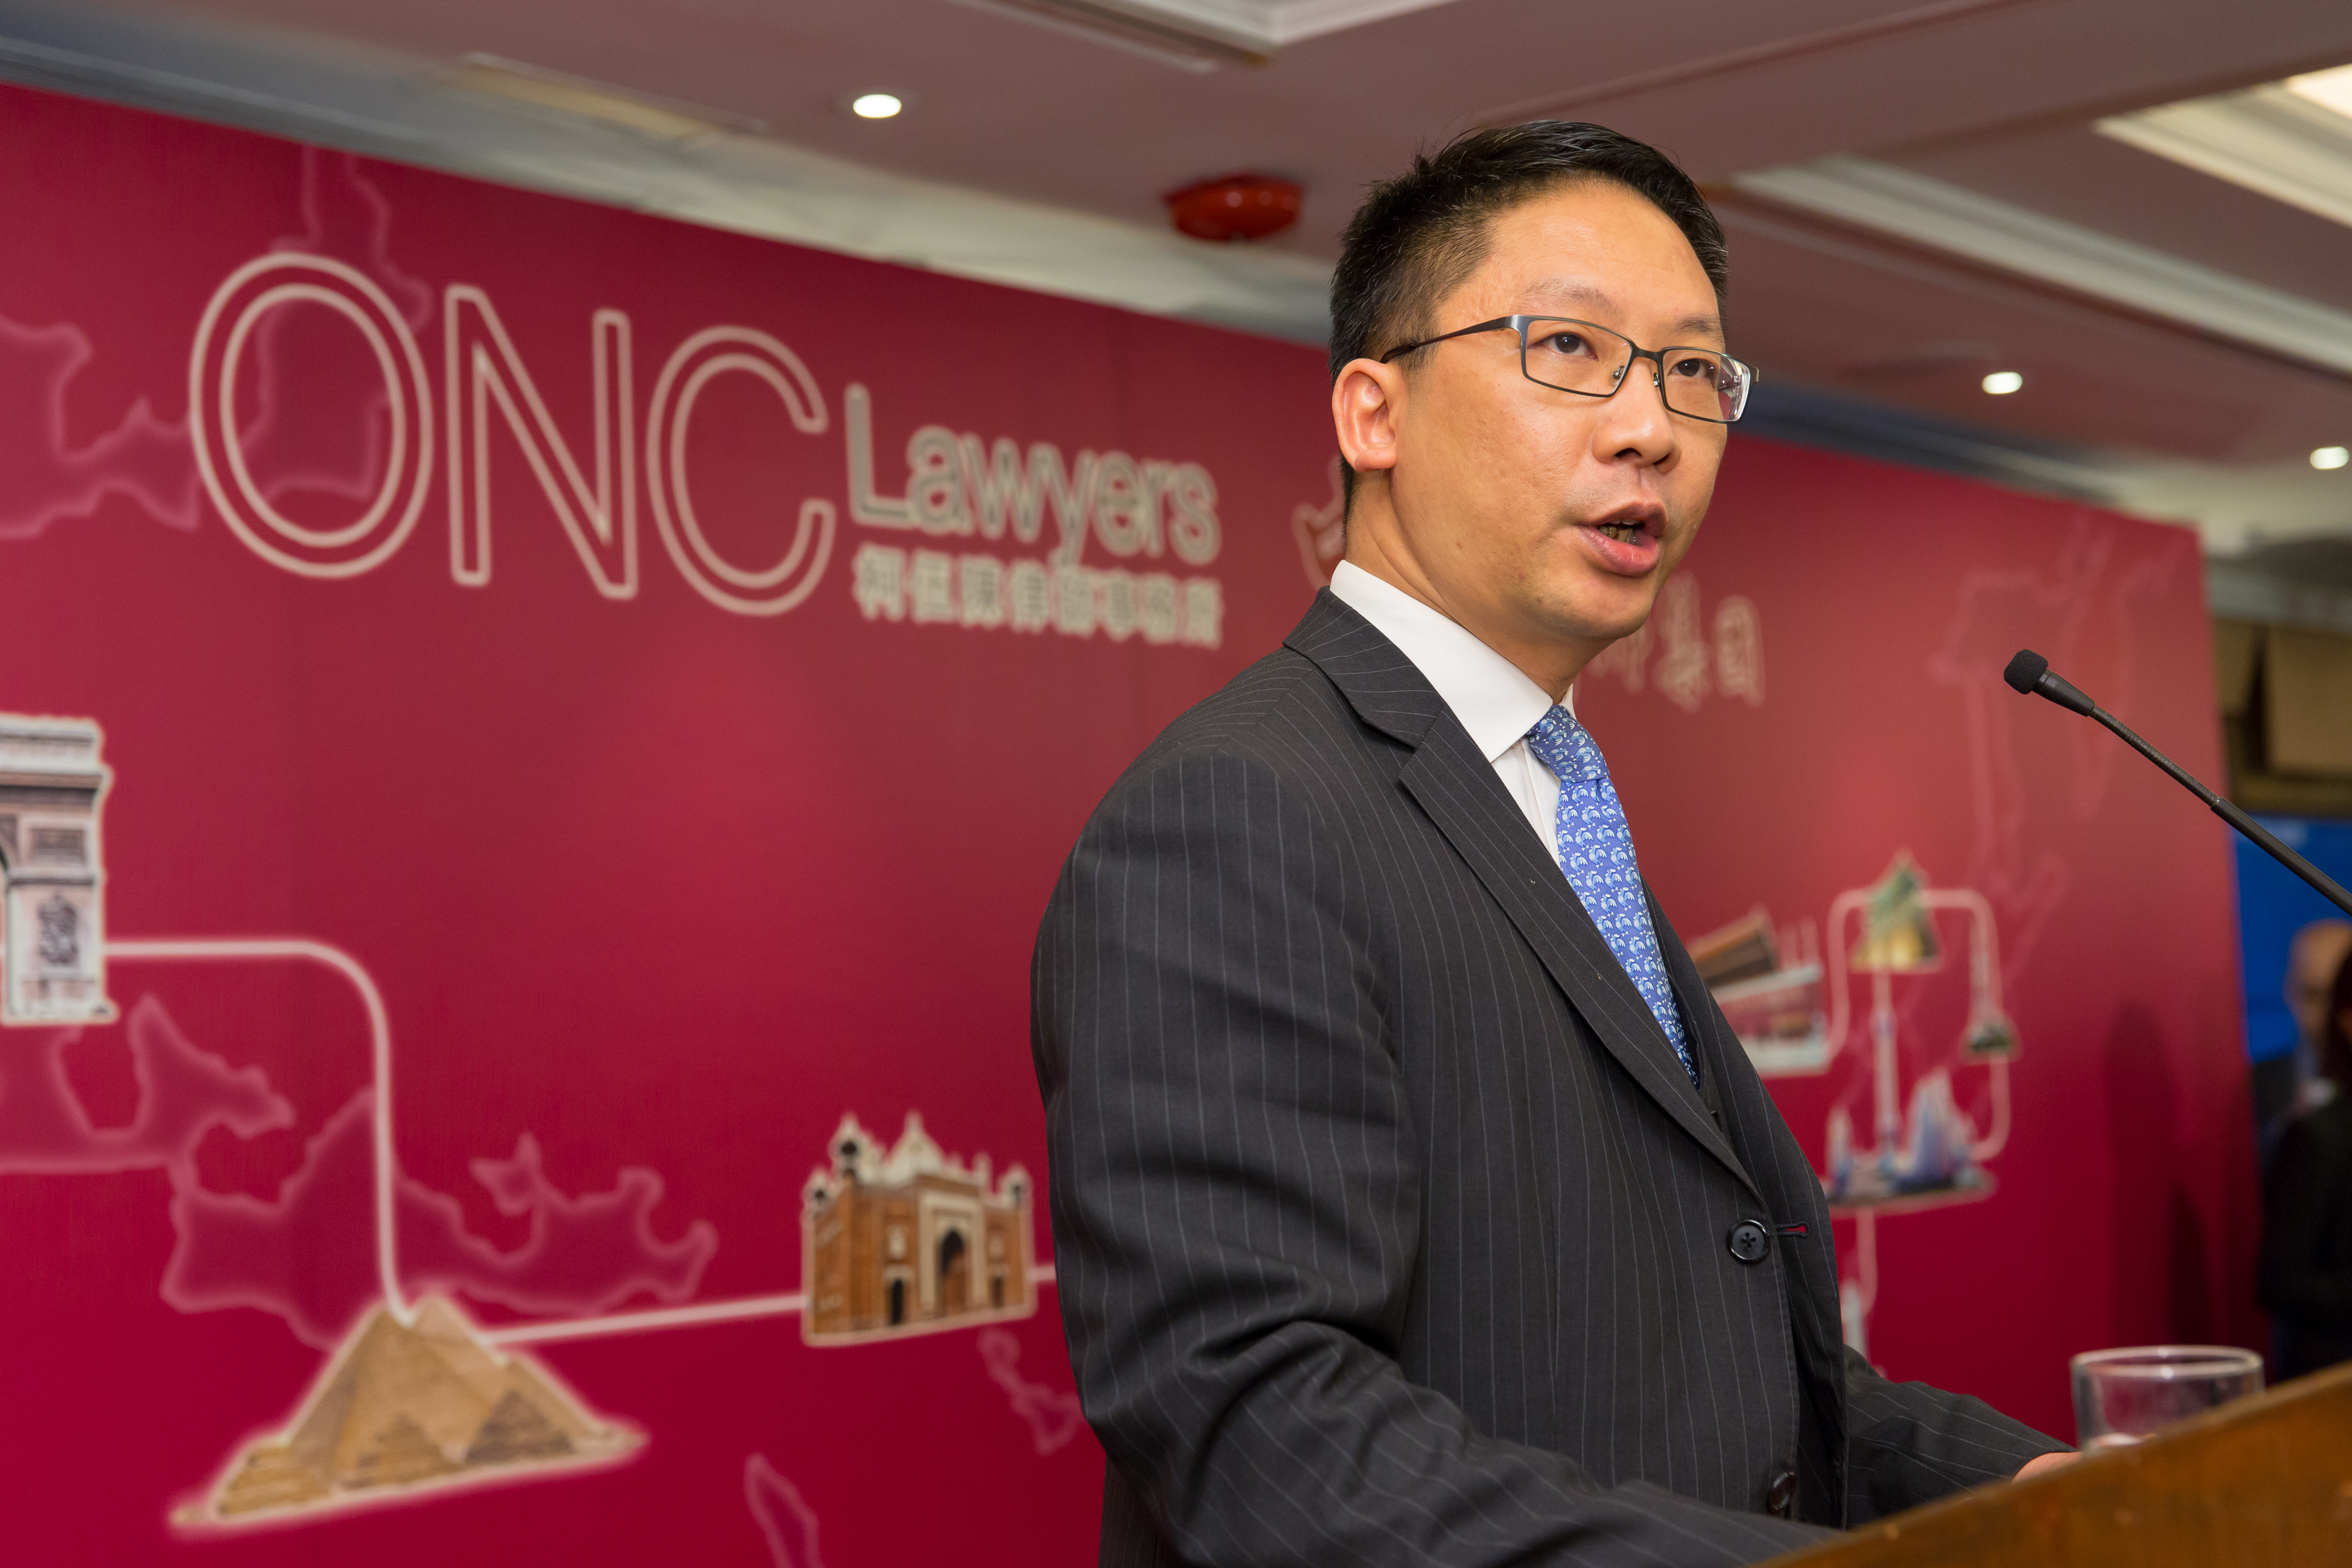 Secretary for Justice Mr. Rimsky Yuen gave a speech at the cocktail reception of ONC Lawyers